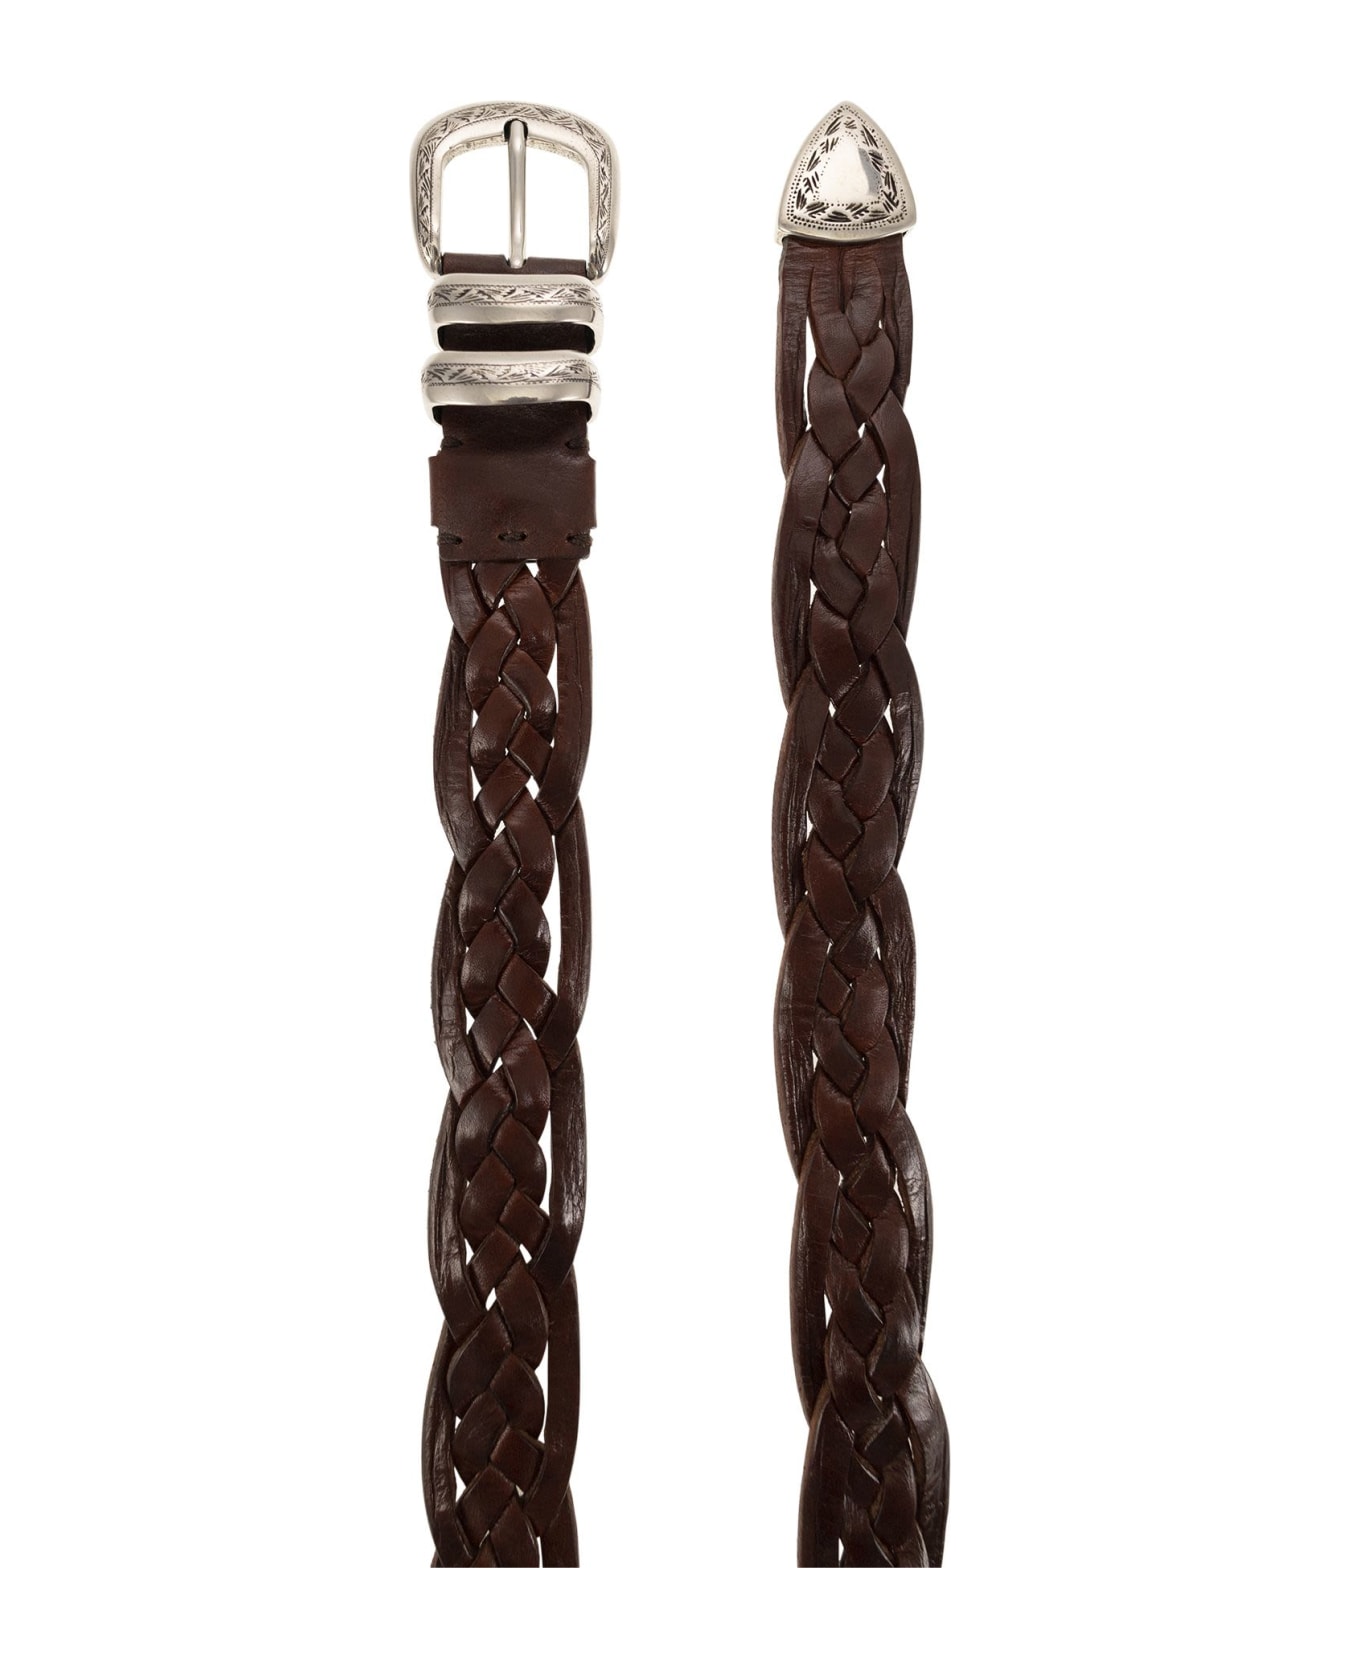 Brunello Cucinelli Braided Calfskin Belt With Detailed Buckle And Tip - Tobacco